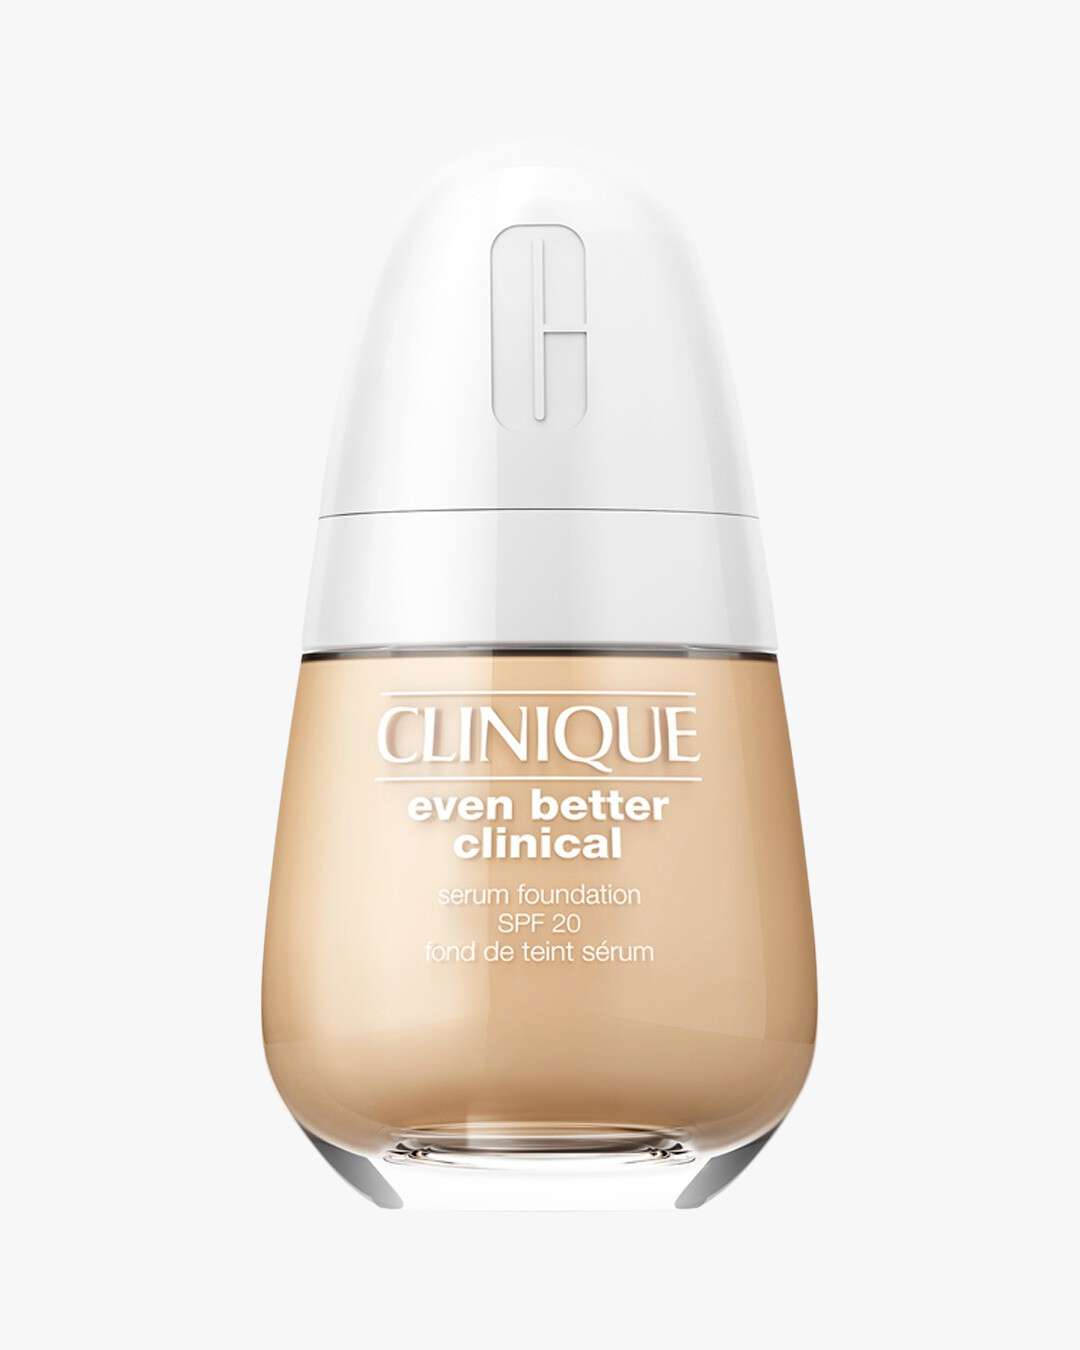 Even Better Clinical Serum Foundation SPF 20 30 ml (Farge: WN 76 Toasted Wheat)